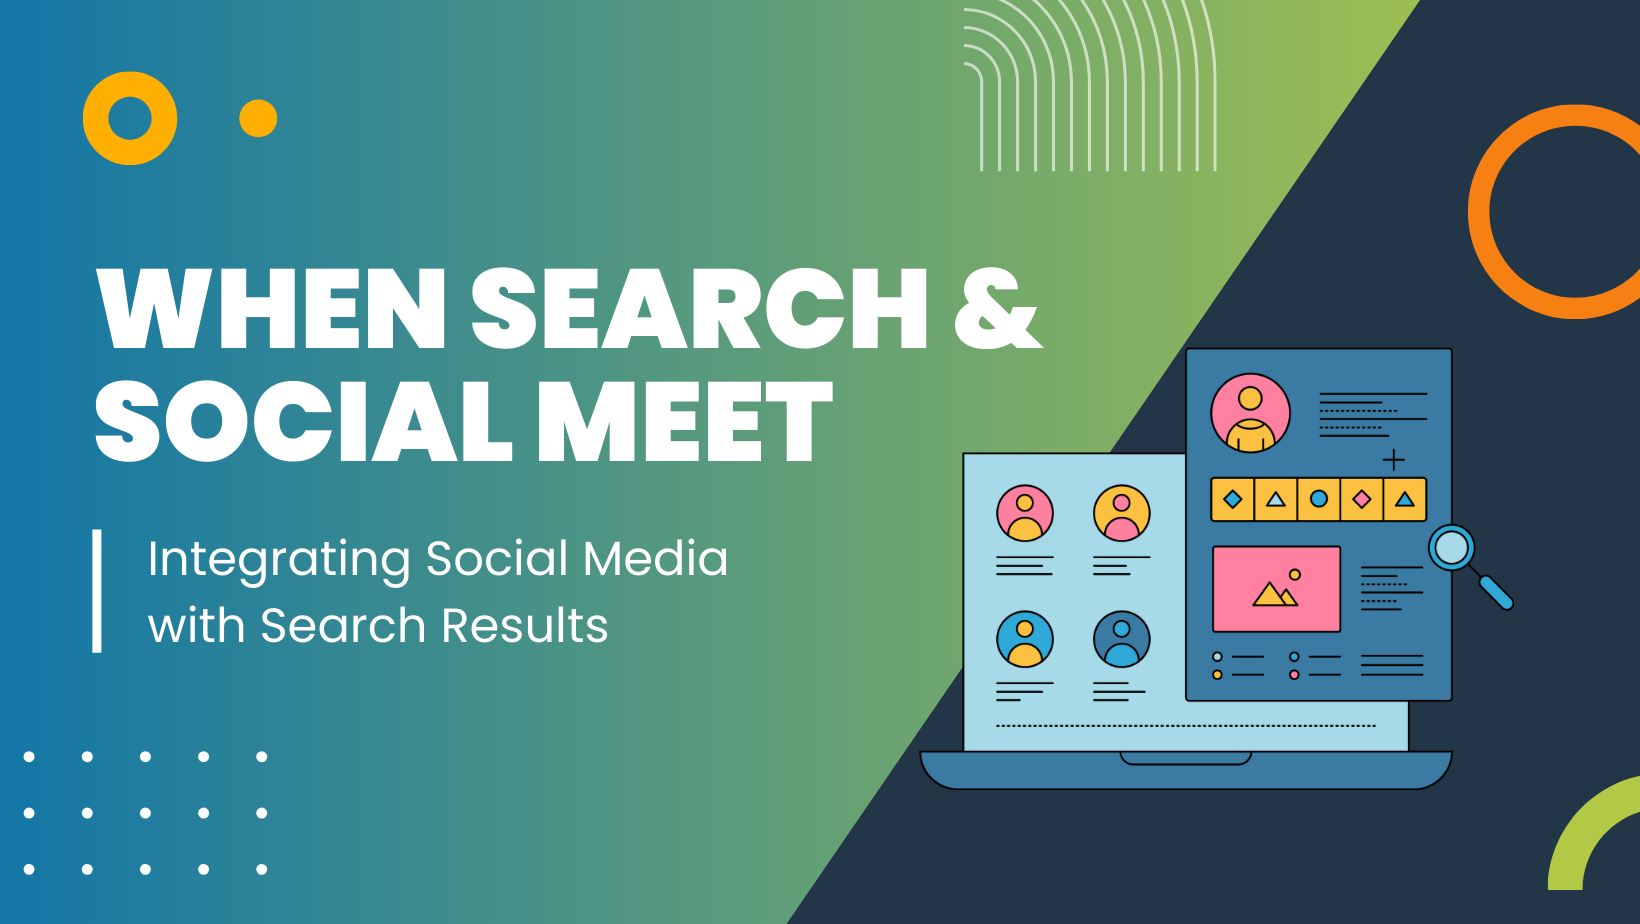 When Search & Social Meet: Integrating Social Media with Search Results graphic